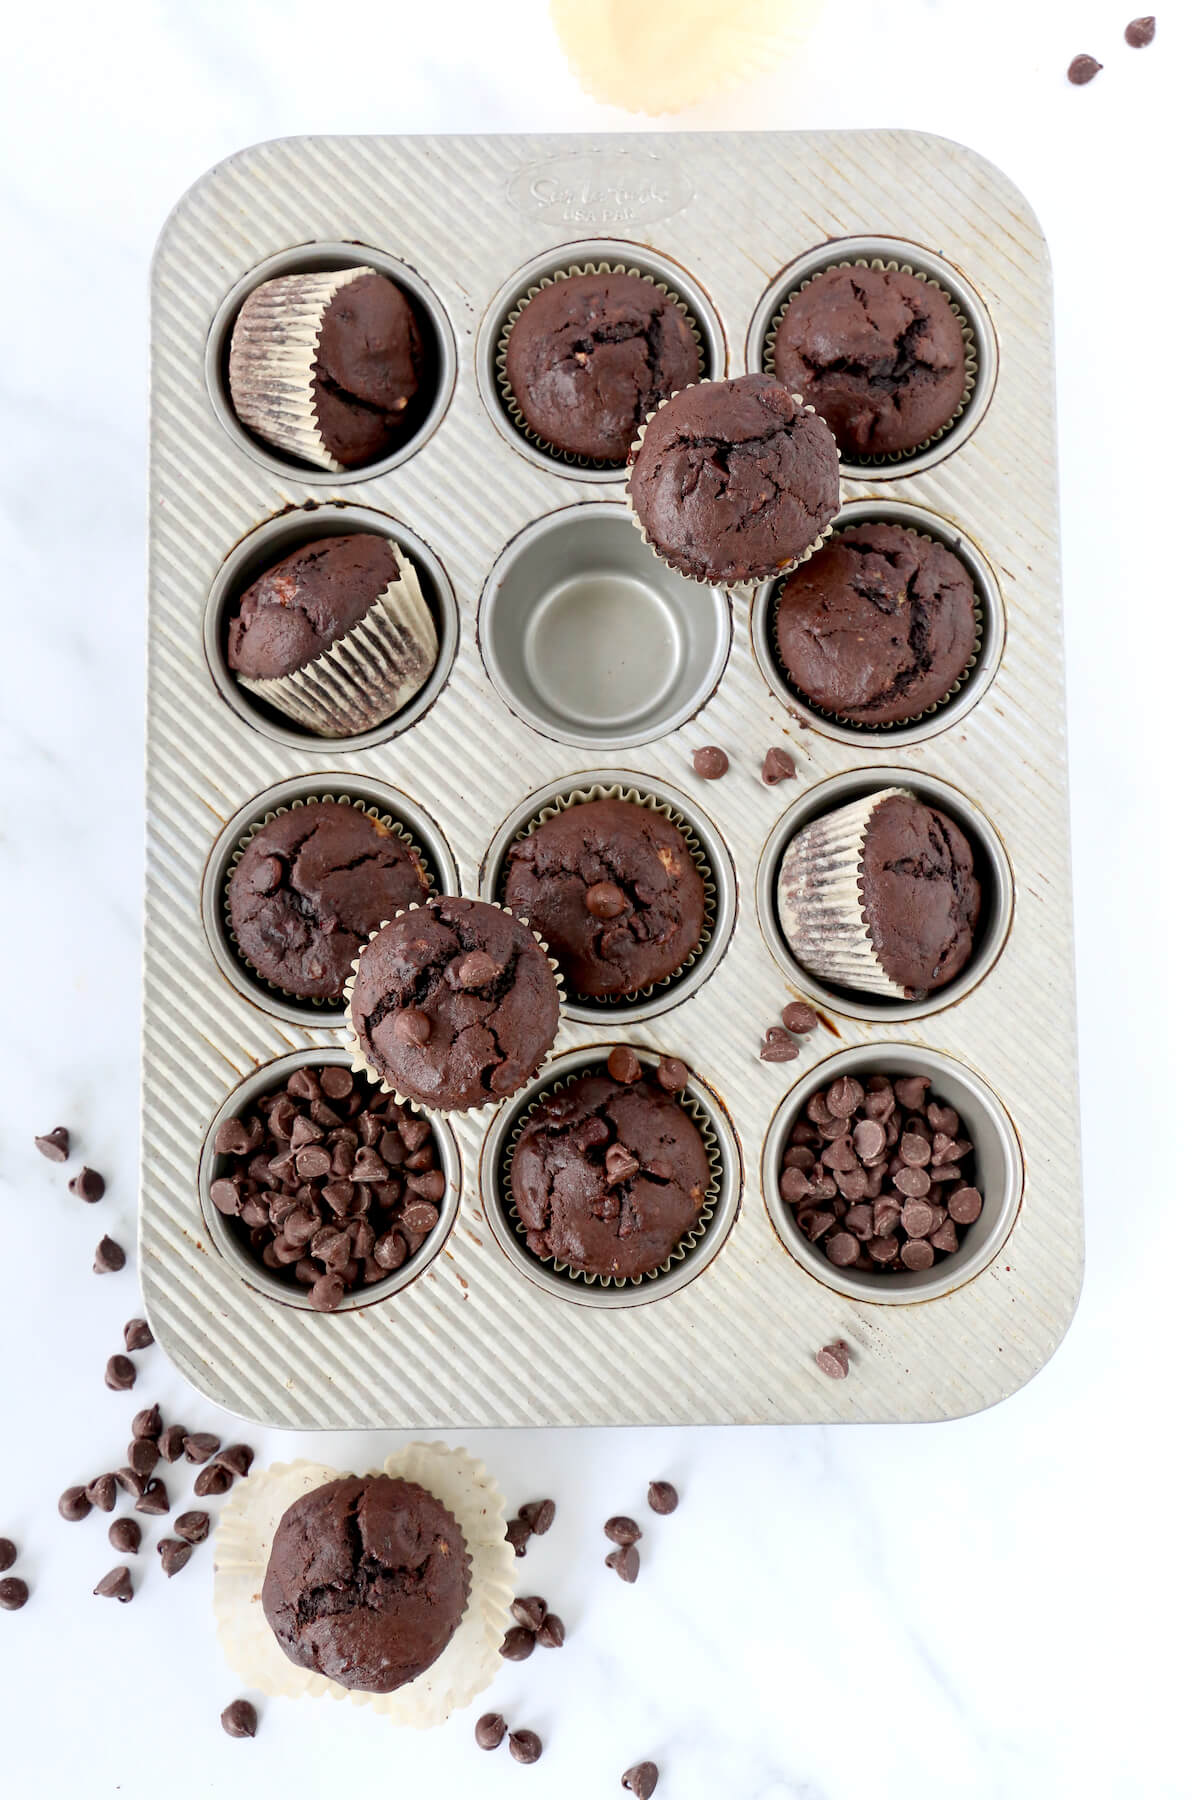 A muffin pan filled with chocolate muffins and chocolate chips.  